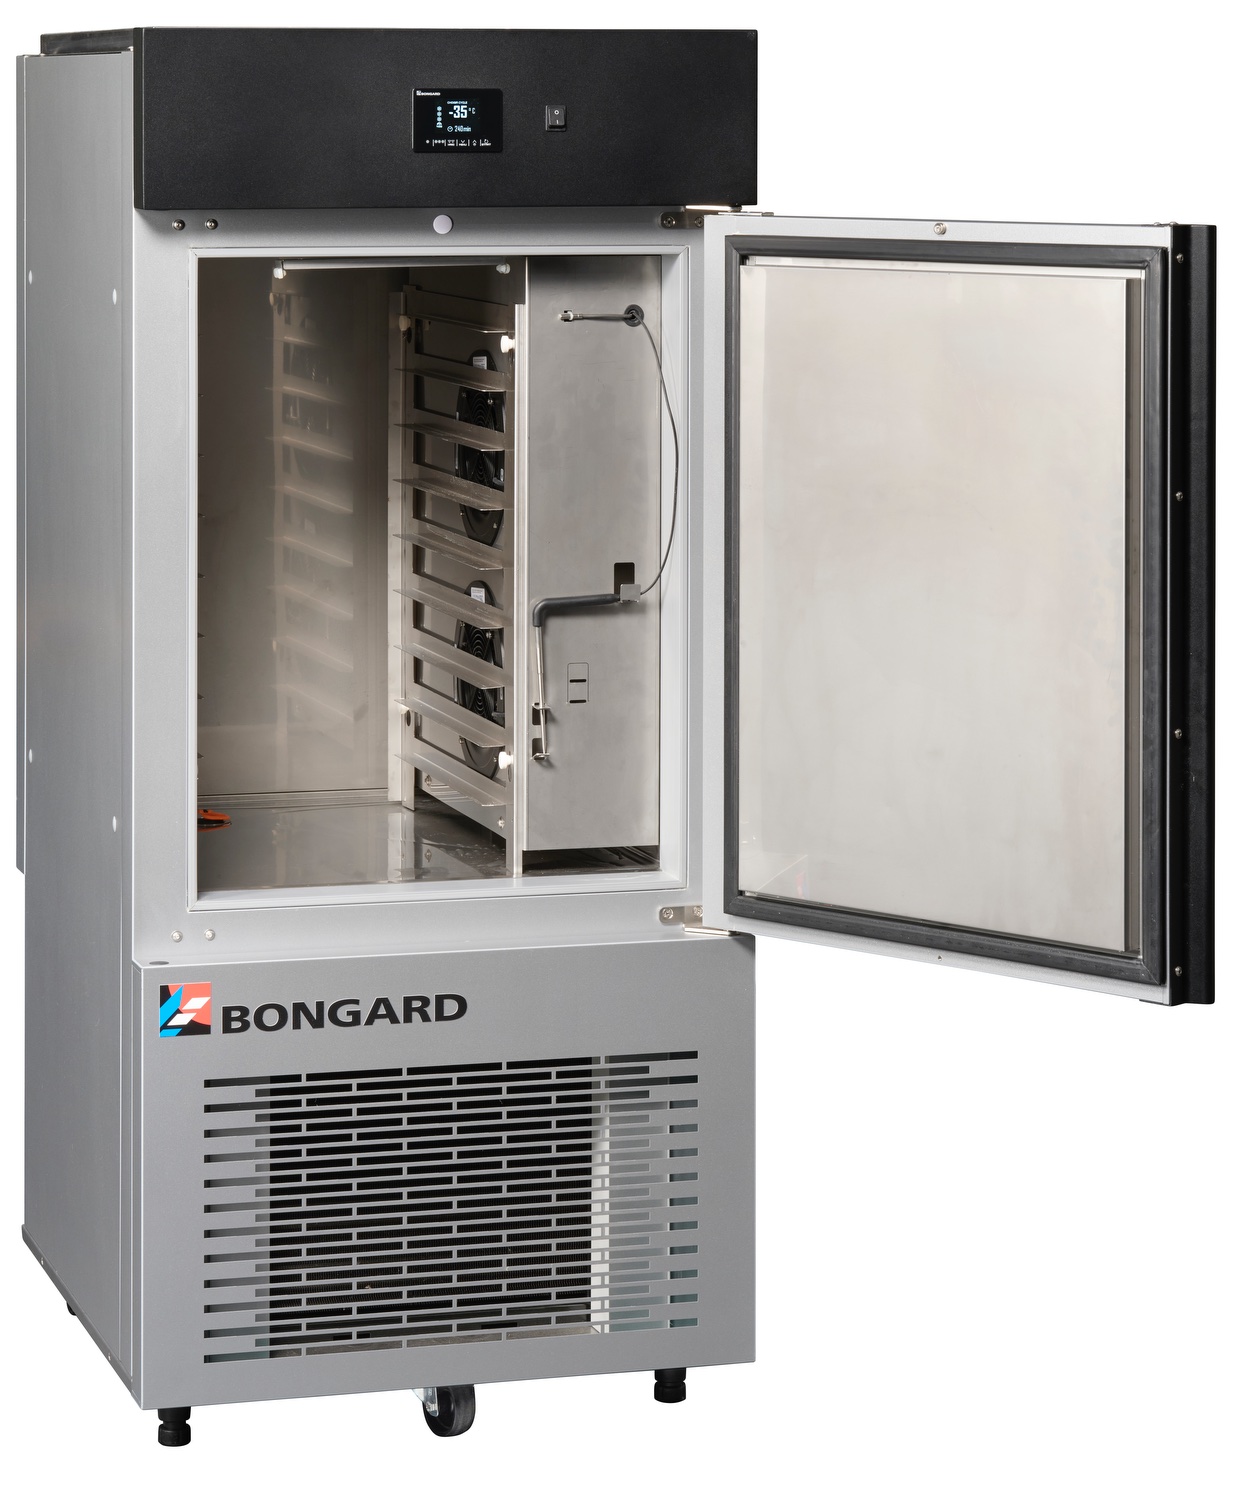 KRONOS-P quick cooling unit and reach-in blast freezer